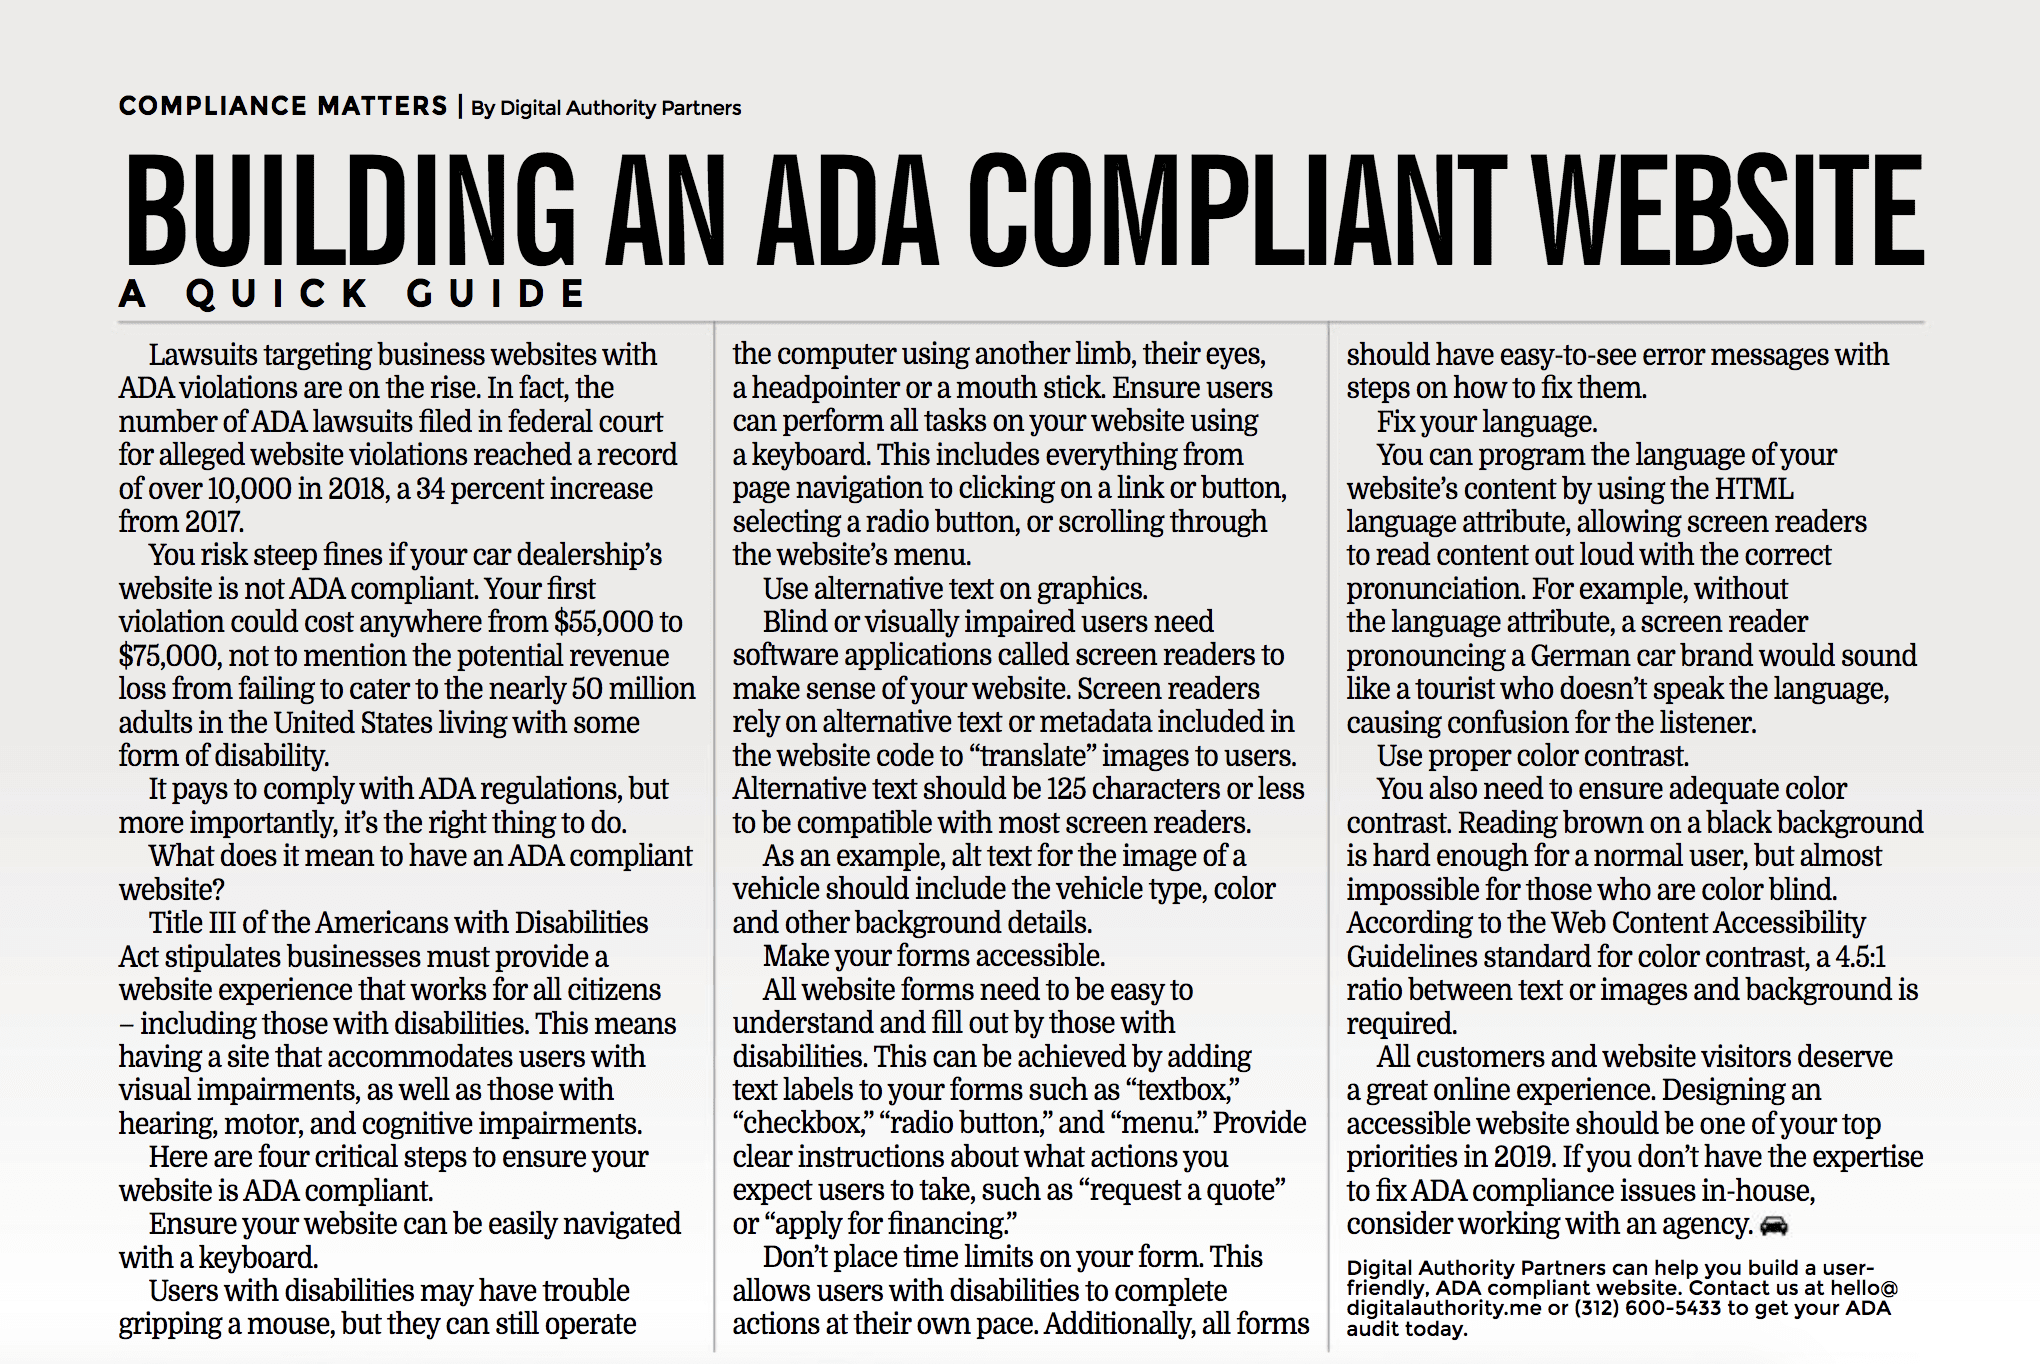 ADA Compliance Article on CIADA's latest issue